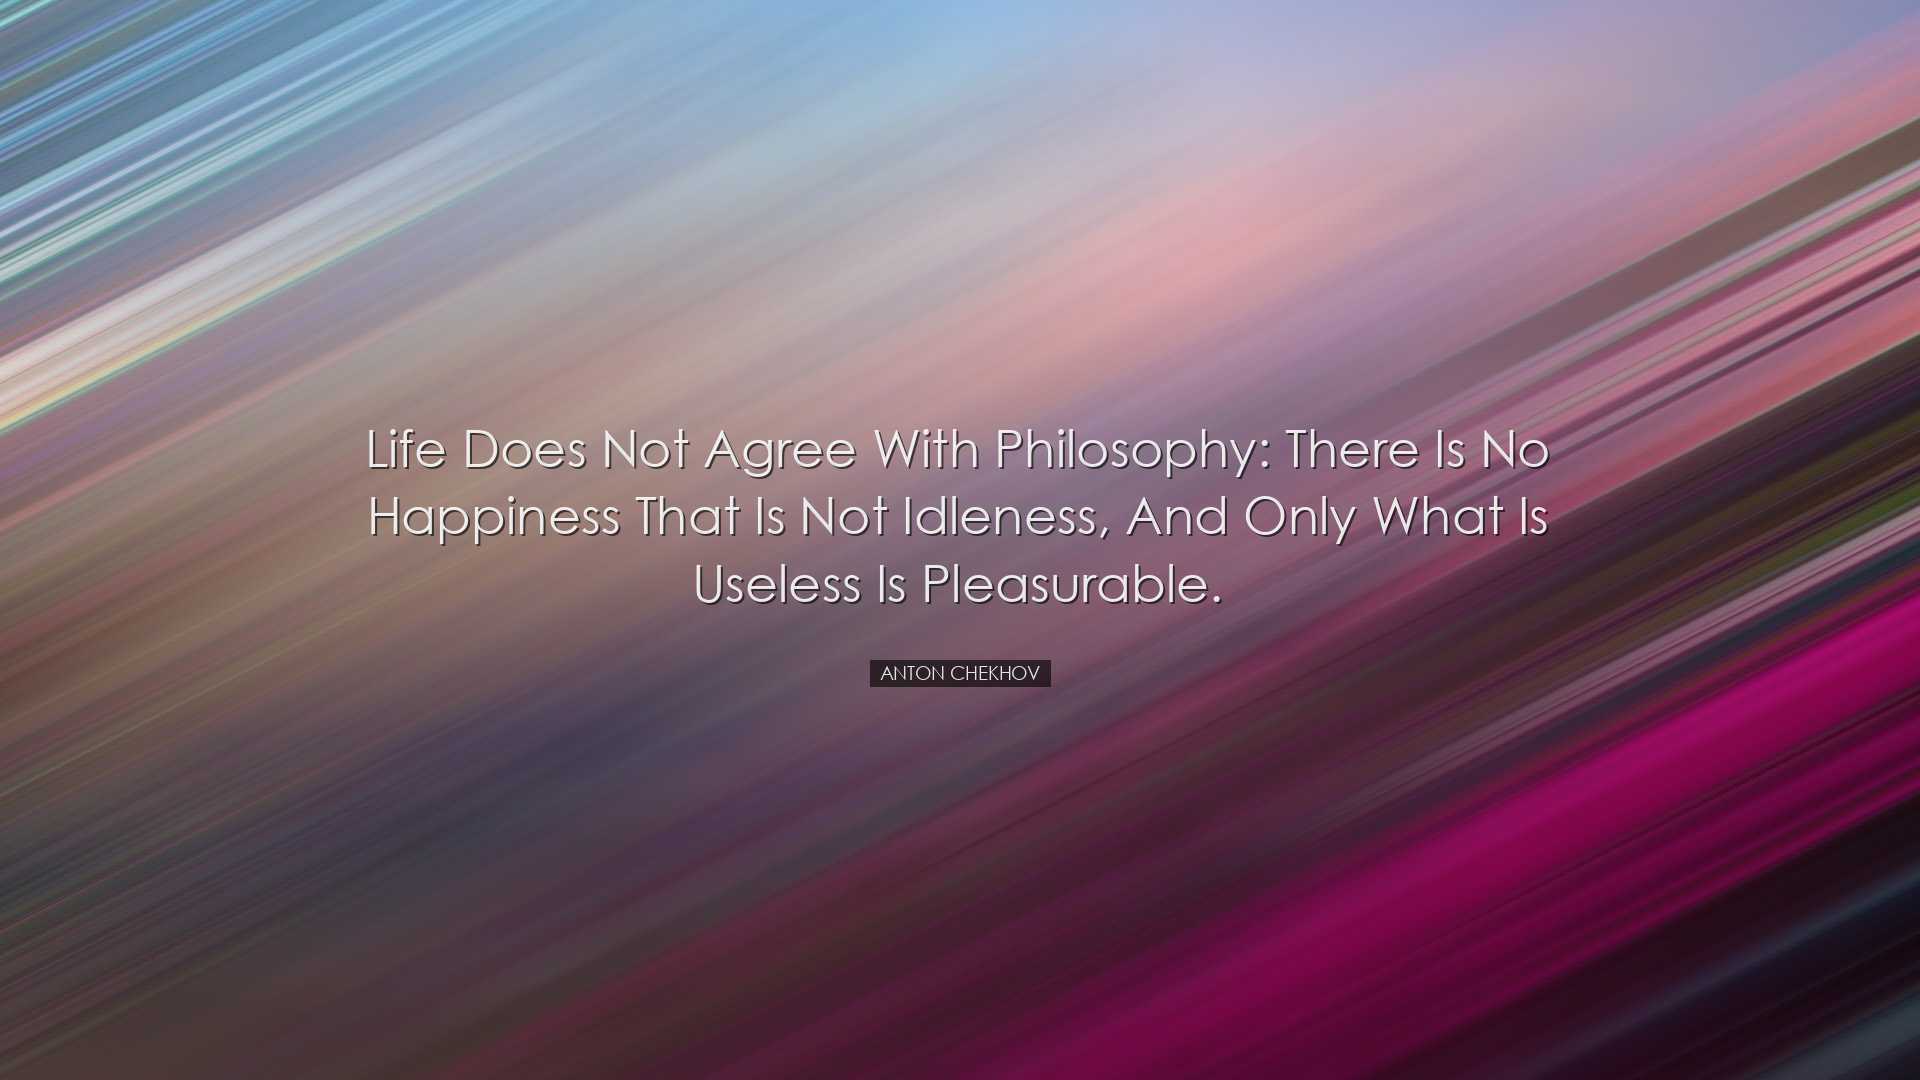 Life does not agree with philosophy: There is no happiness that is